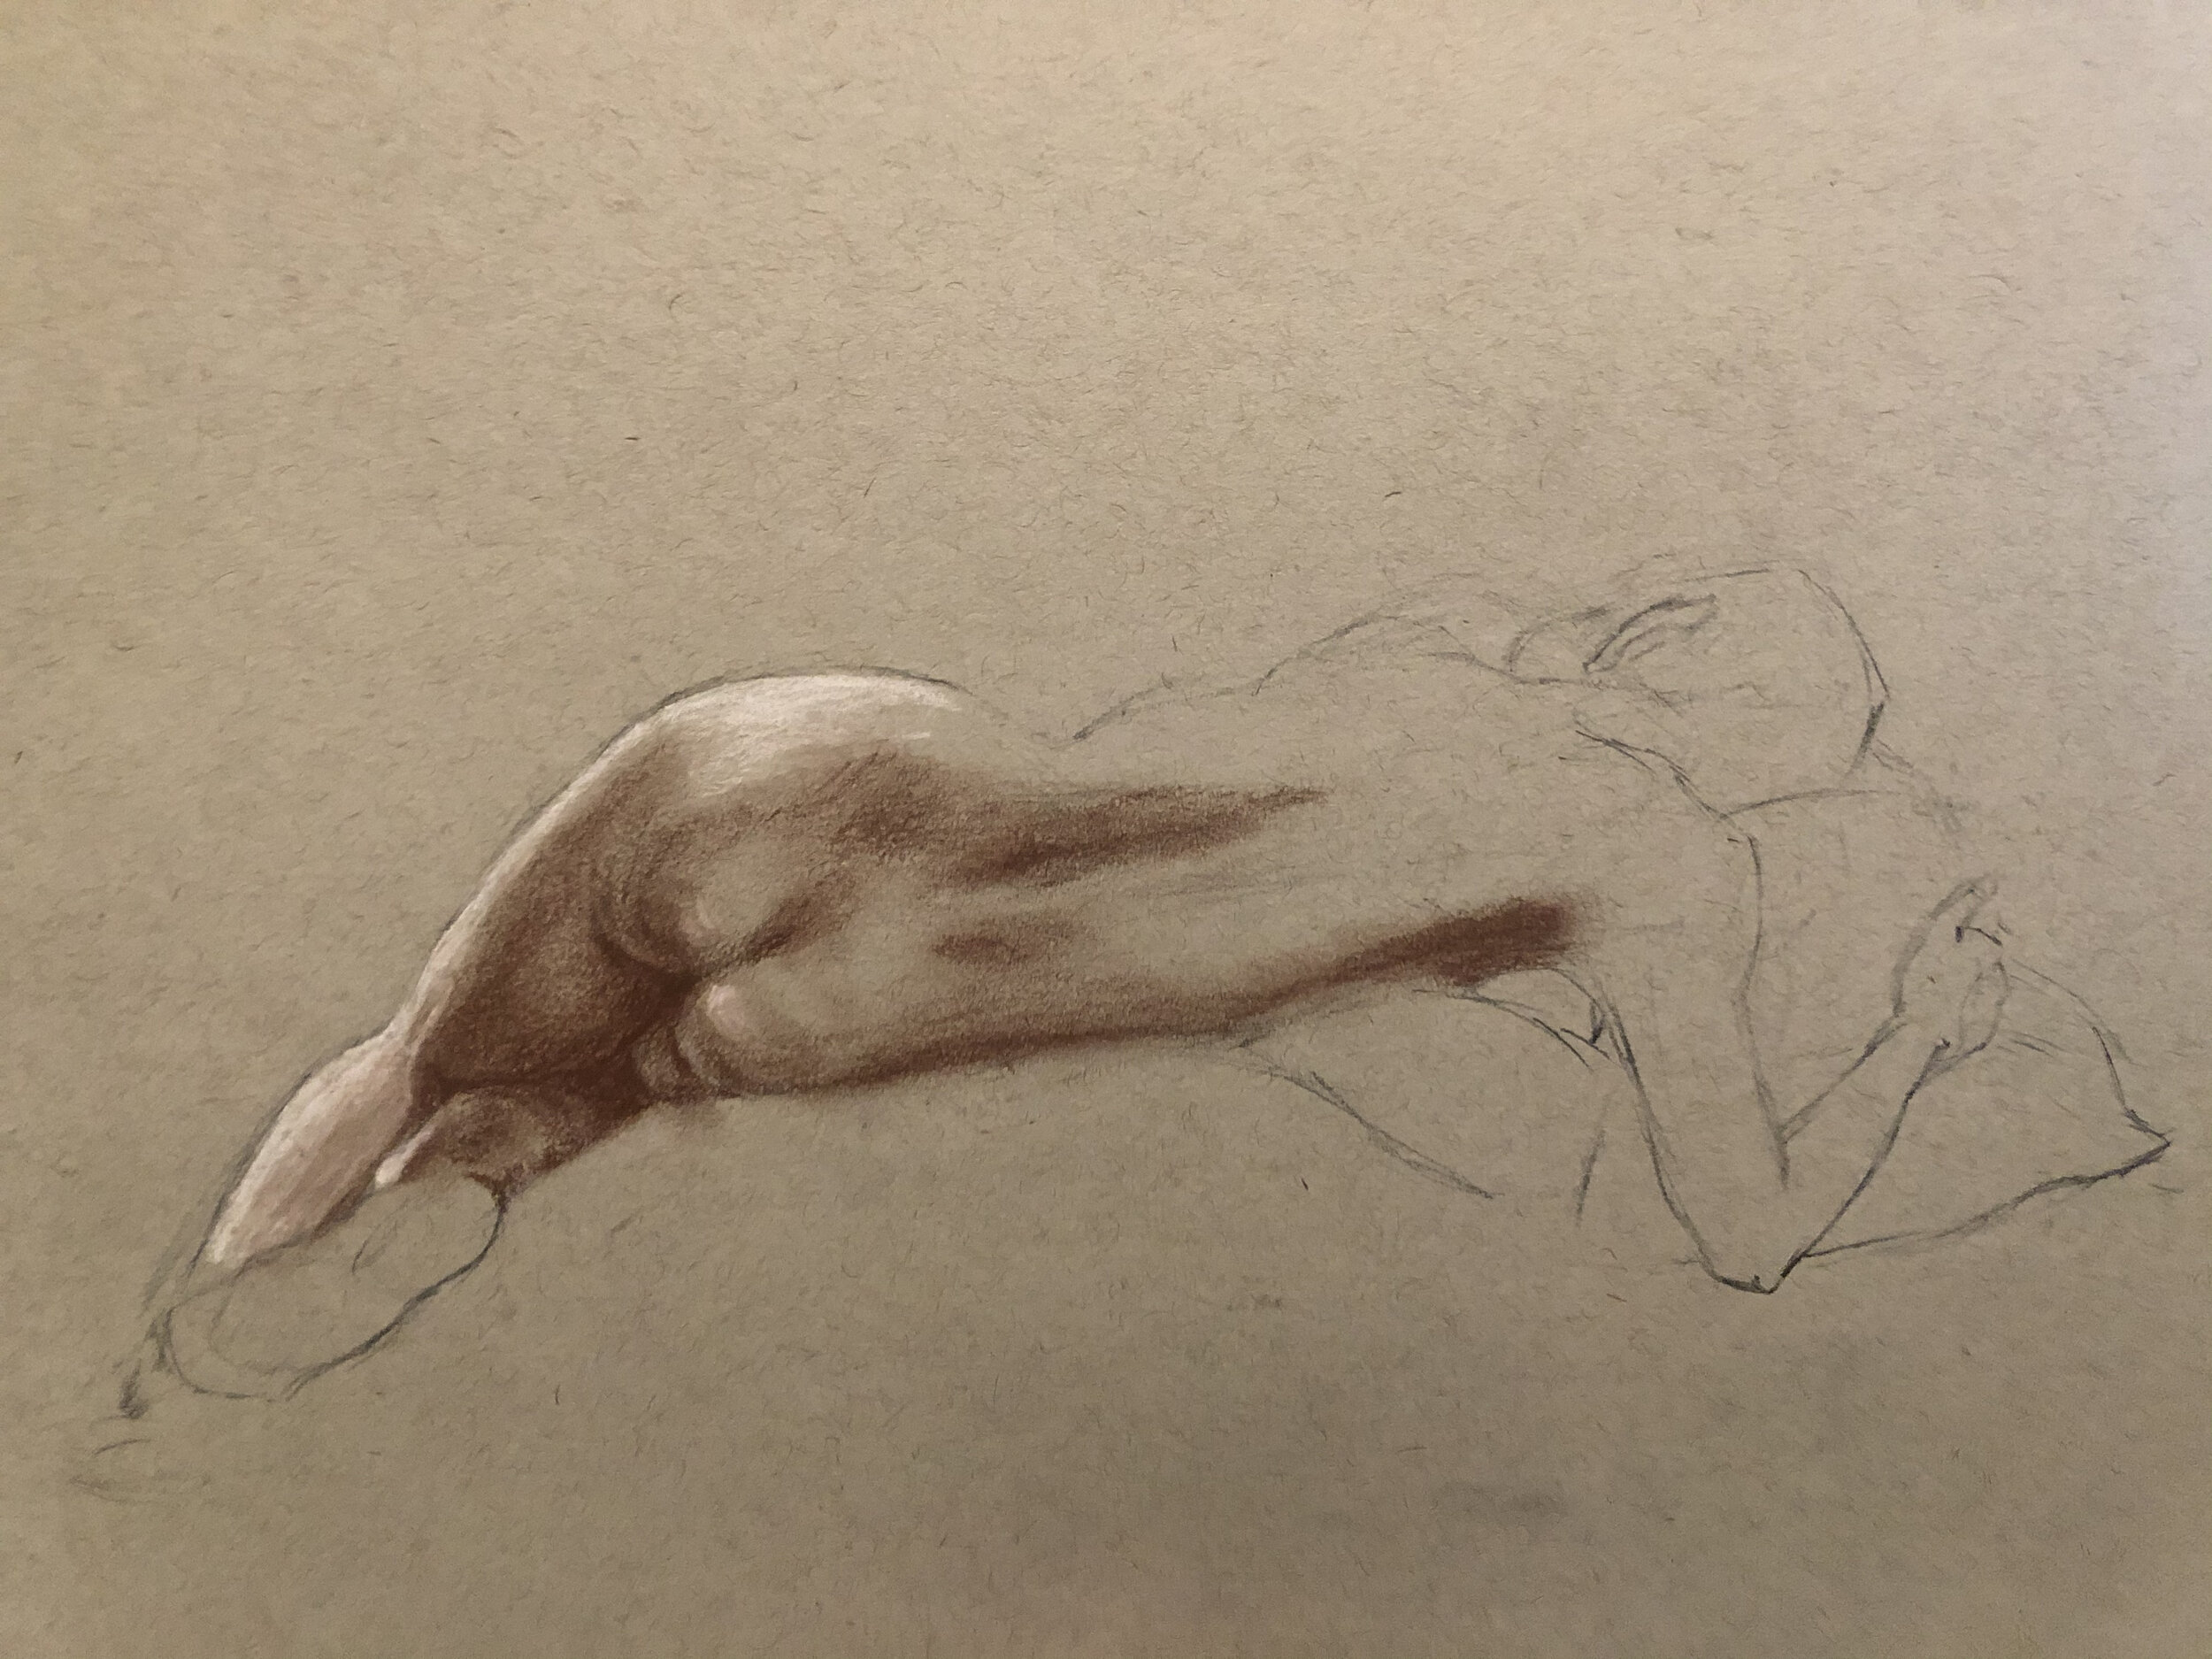  Sepia &amp; Charcoal on Paper  2019 